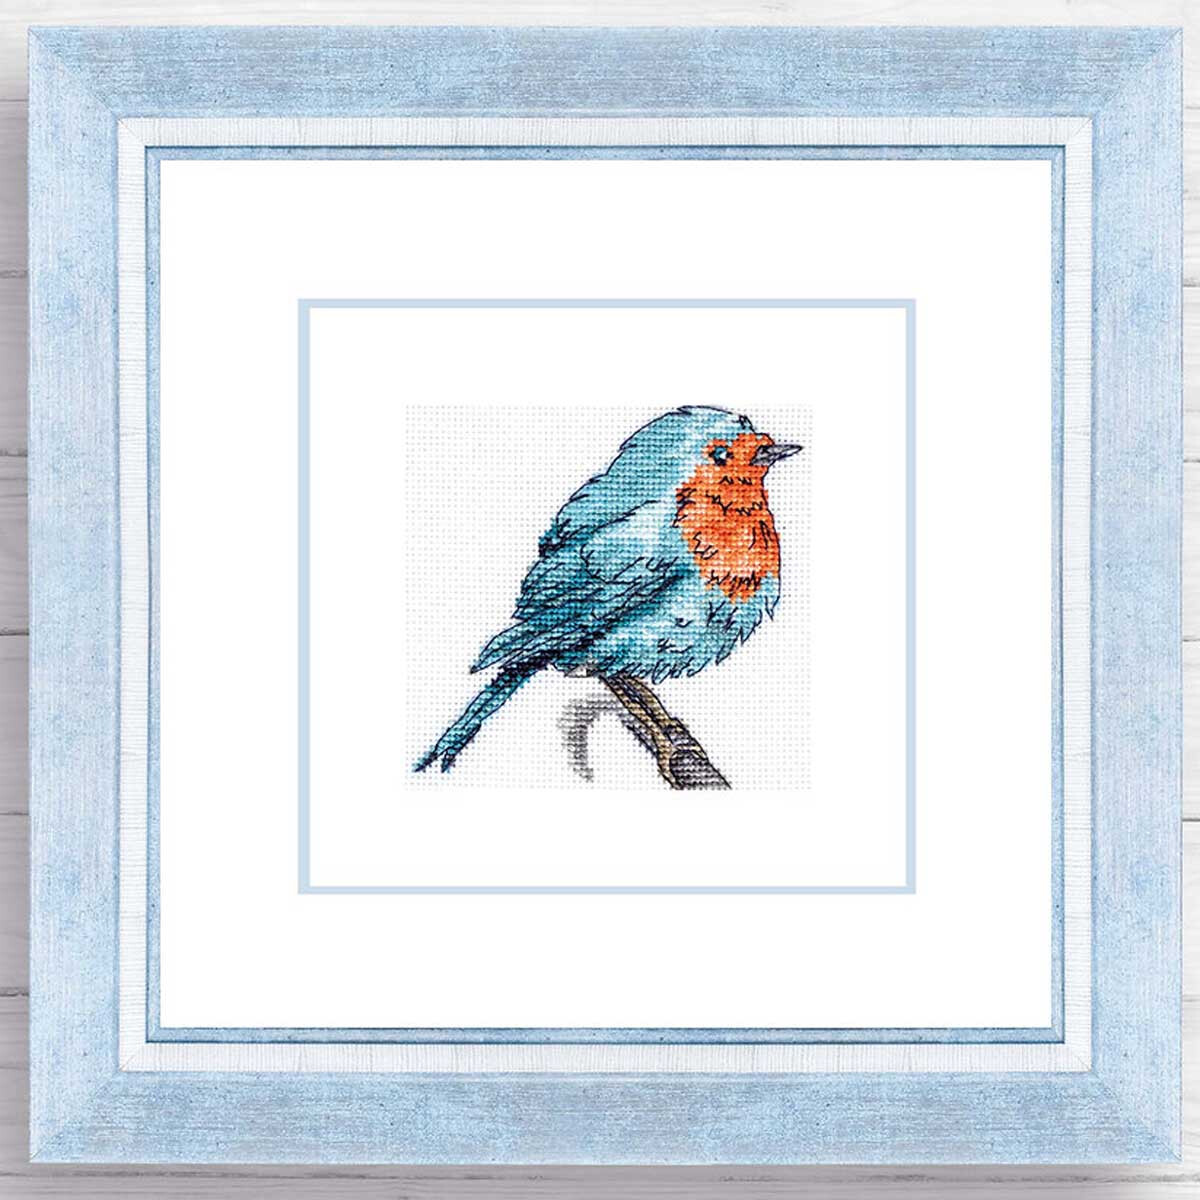 A framed embroidered picture showing a bird with blue and...